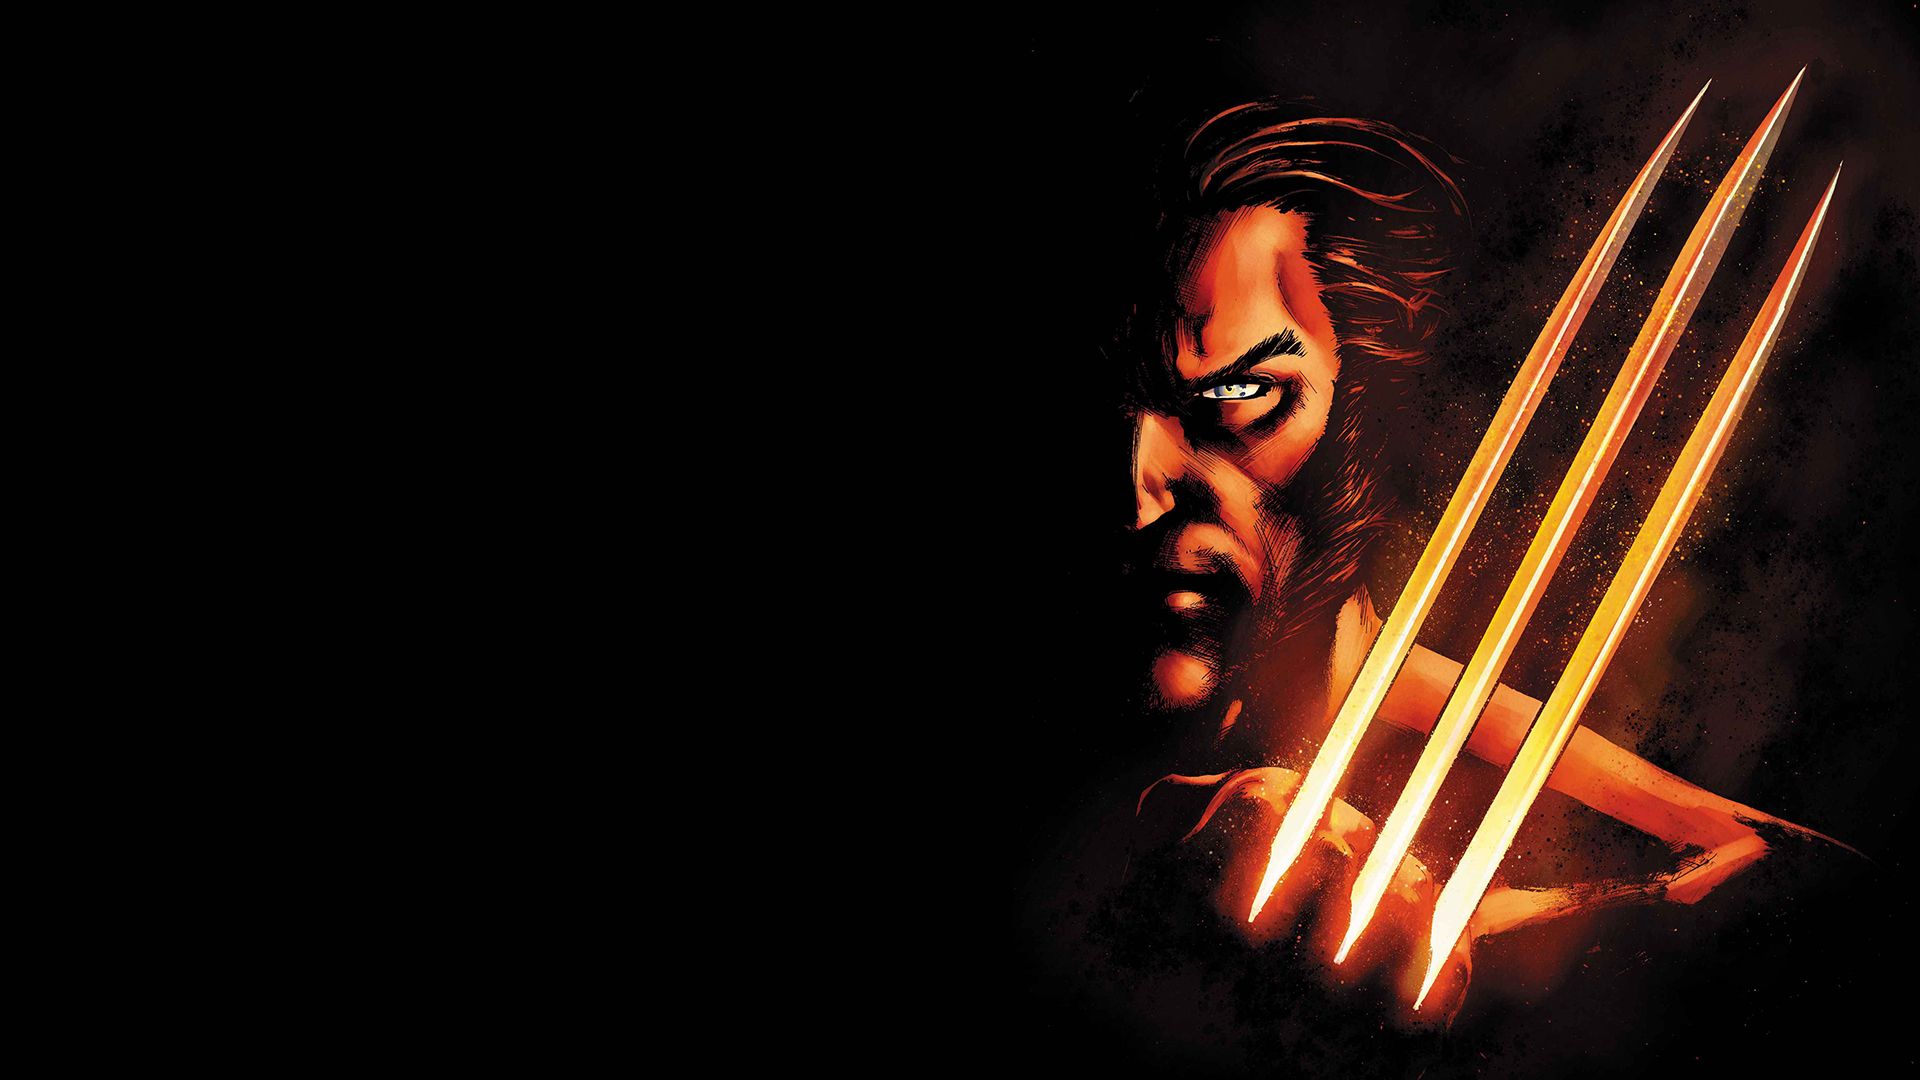 1920x1080 Wolverine Hd Wallpaper For Mobile